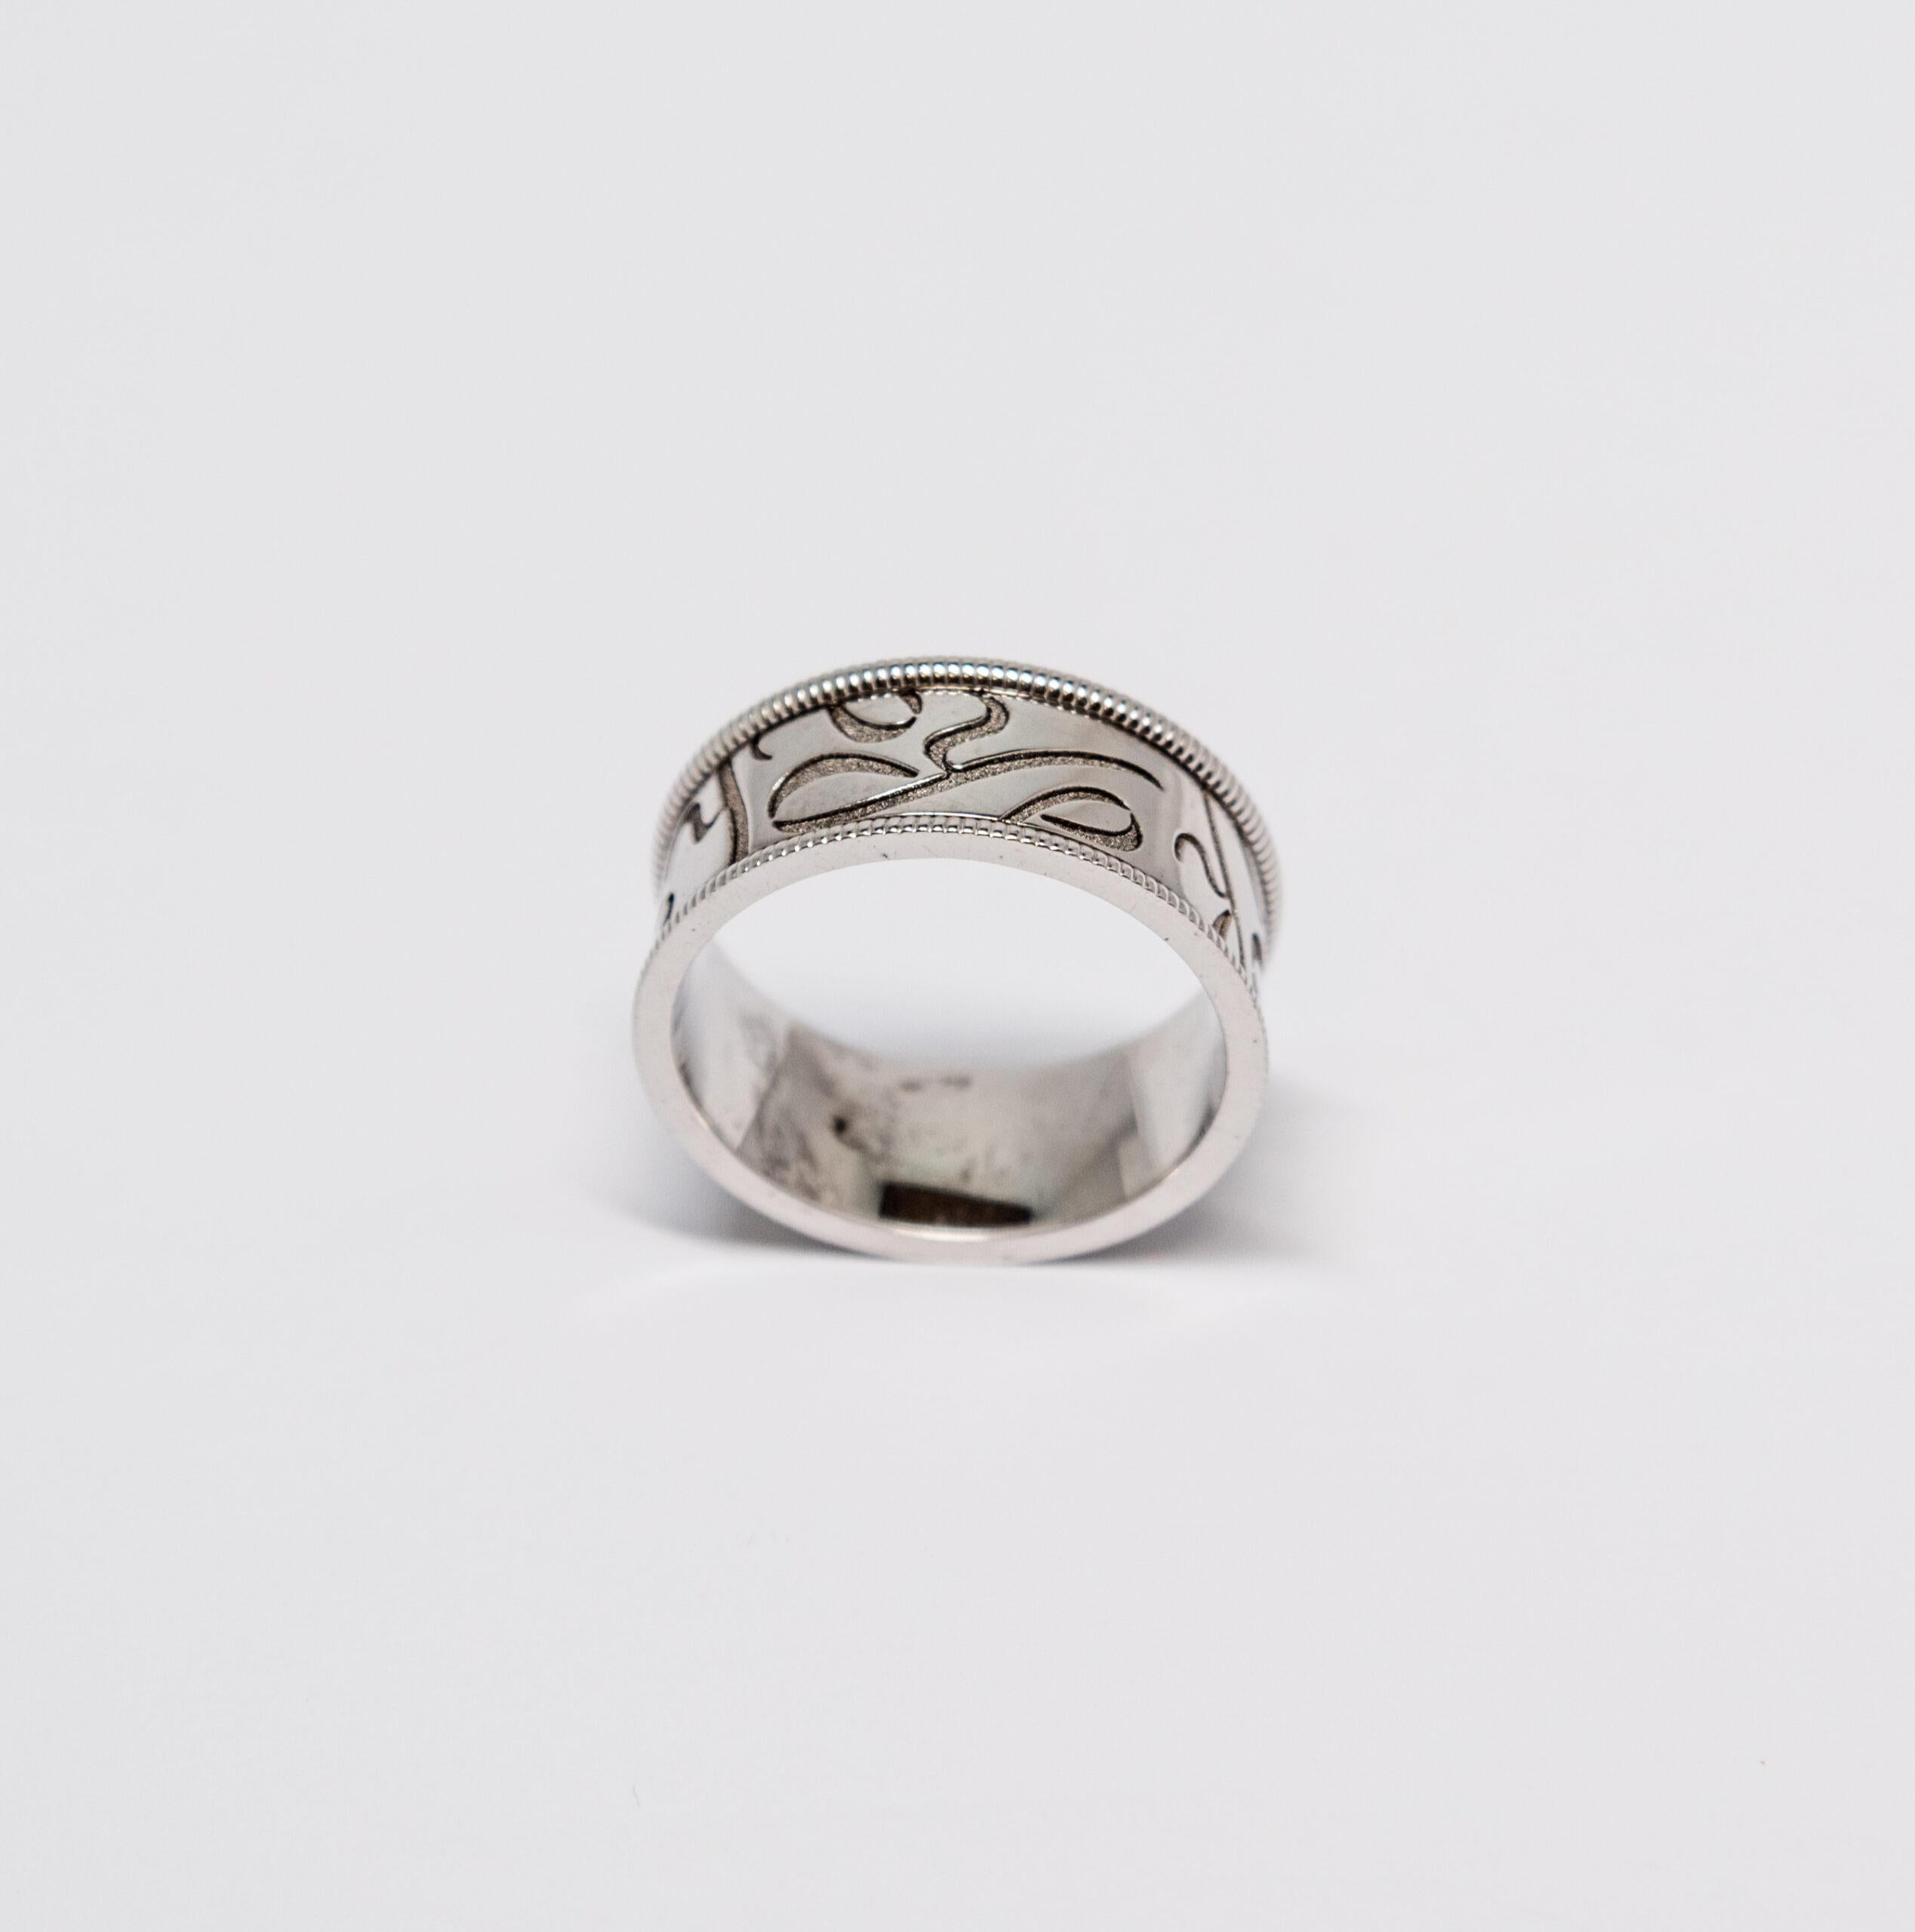 This ring is made of 18K White Gold. Band ring with engraved “Y” letters.

Size – 59 (9 US)